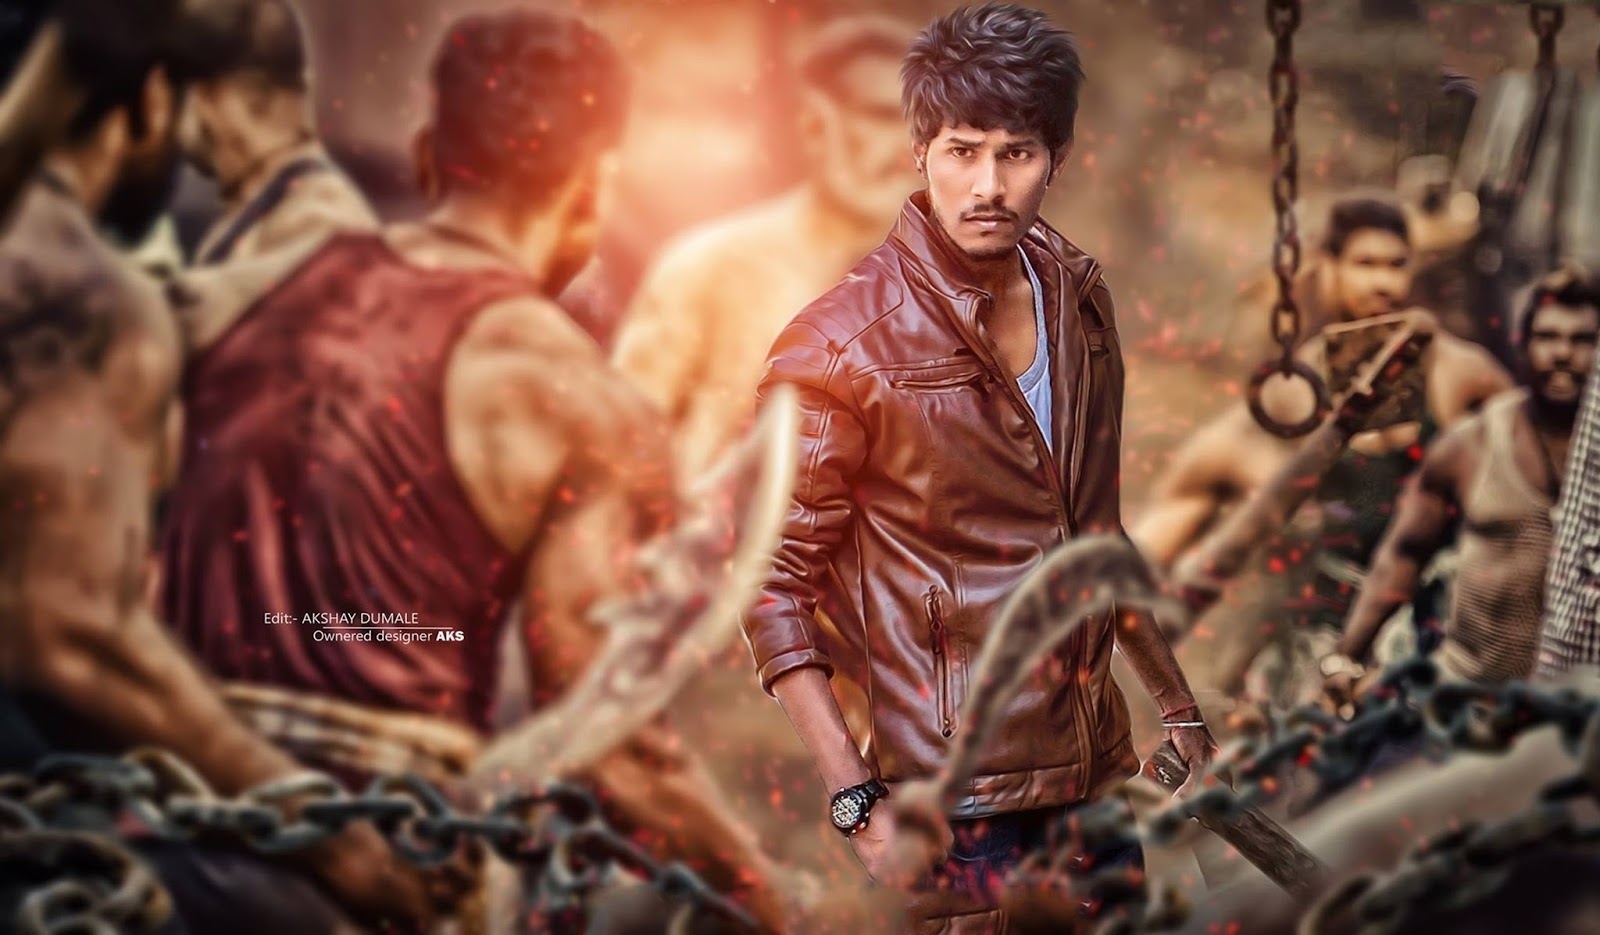 Tamil Action Movie Poster Design In Photoshop - Make Perfect Feel Real